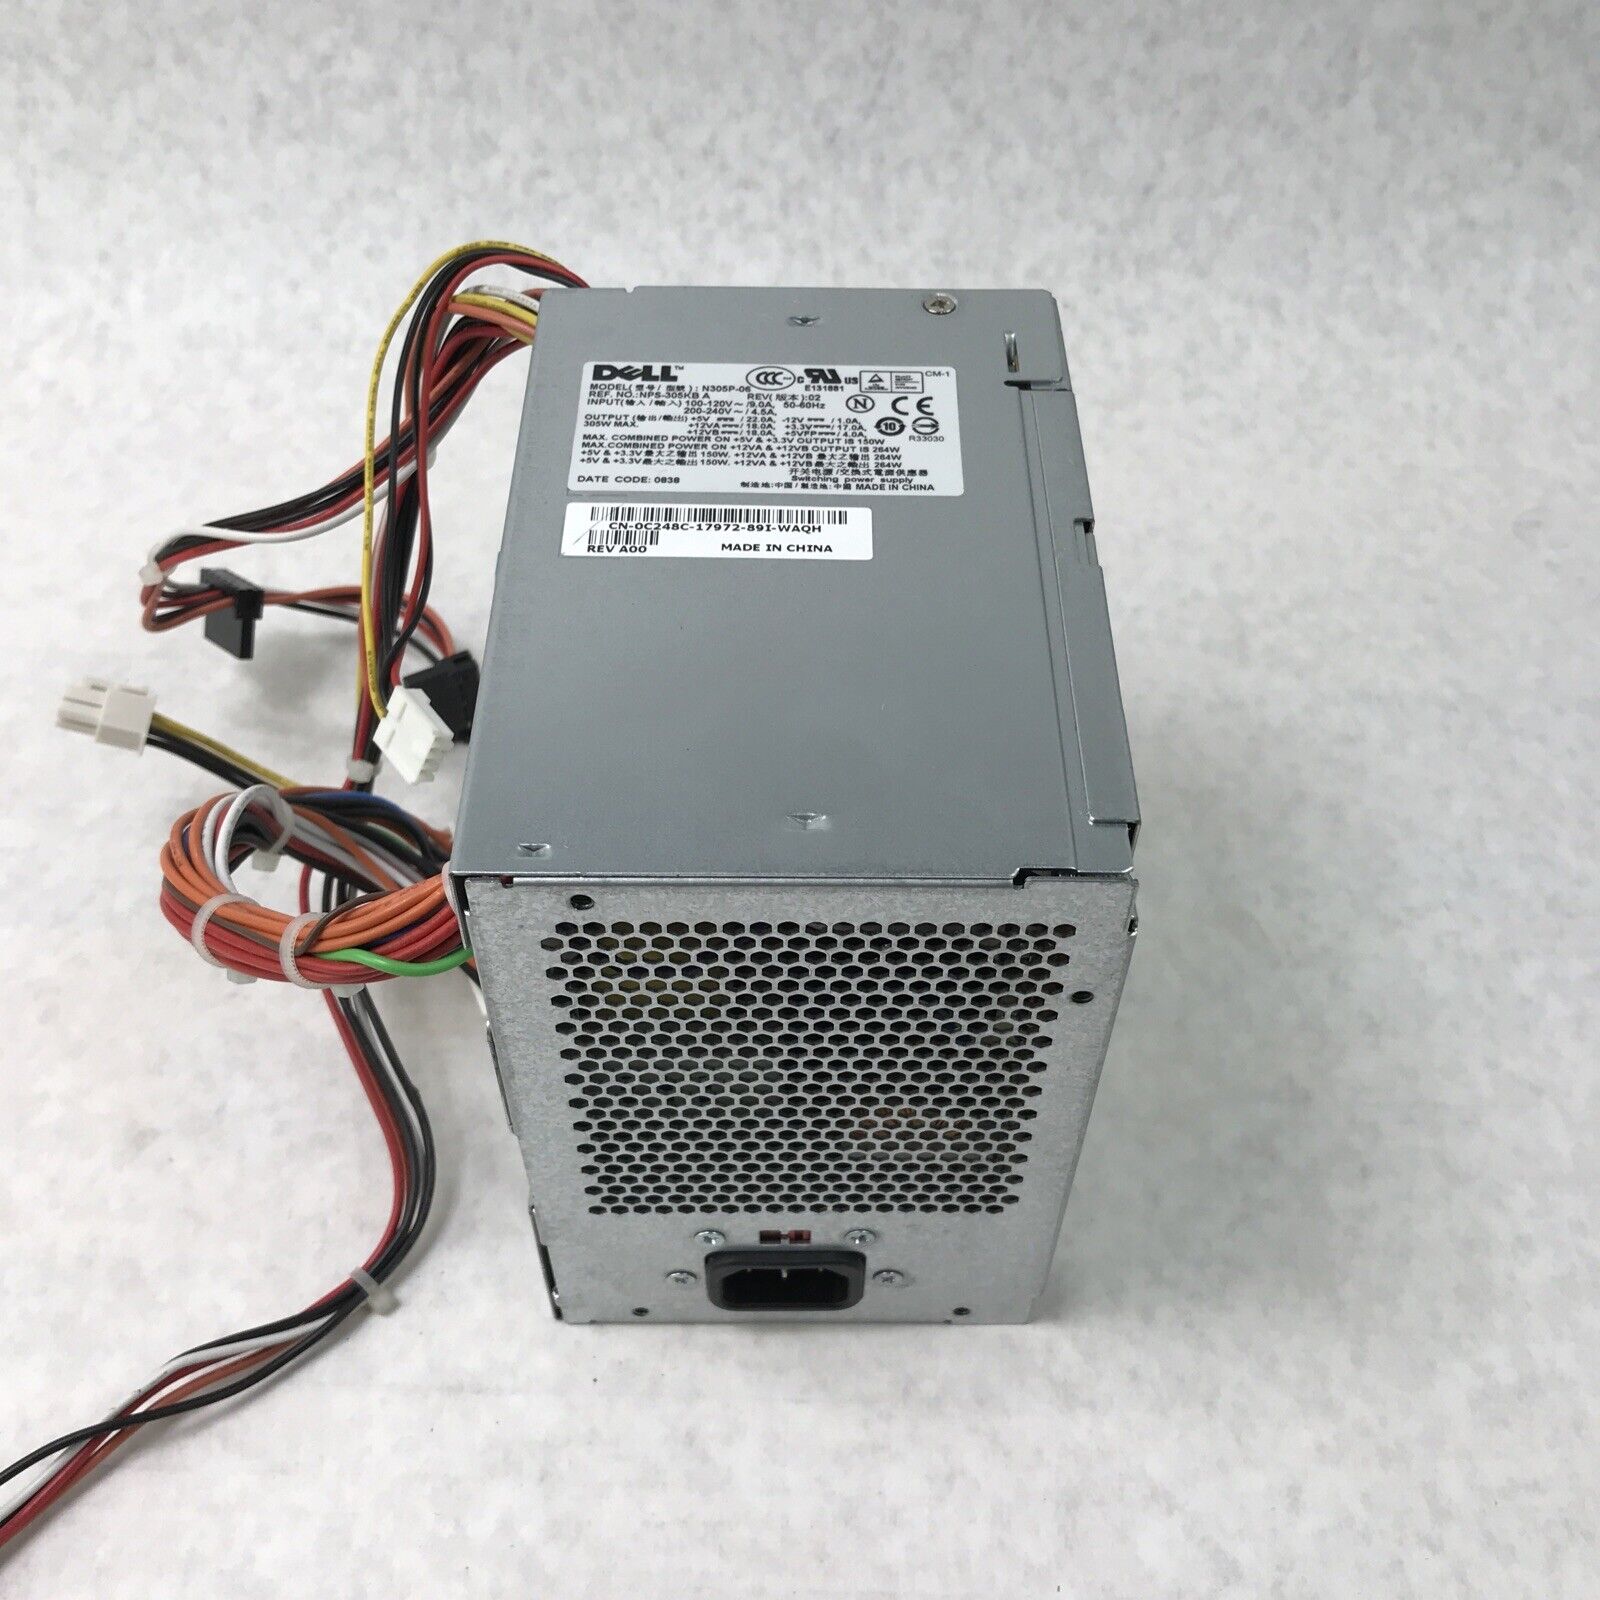 Dell H305P-06 240V 60Hz 9.0A 305W Power Supply NPS-305KB (Tested and Working)